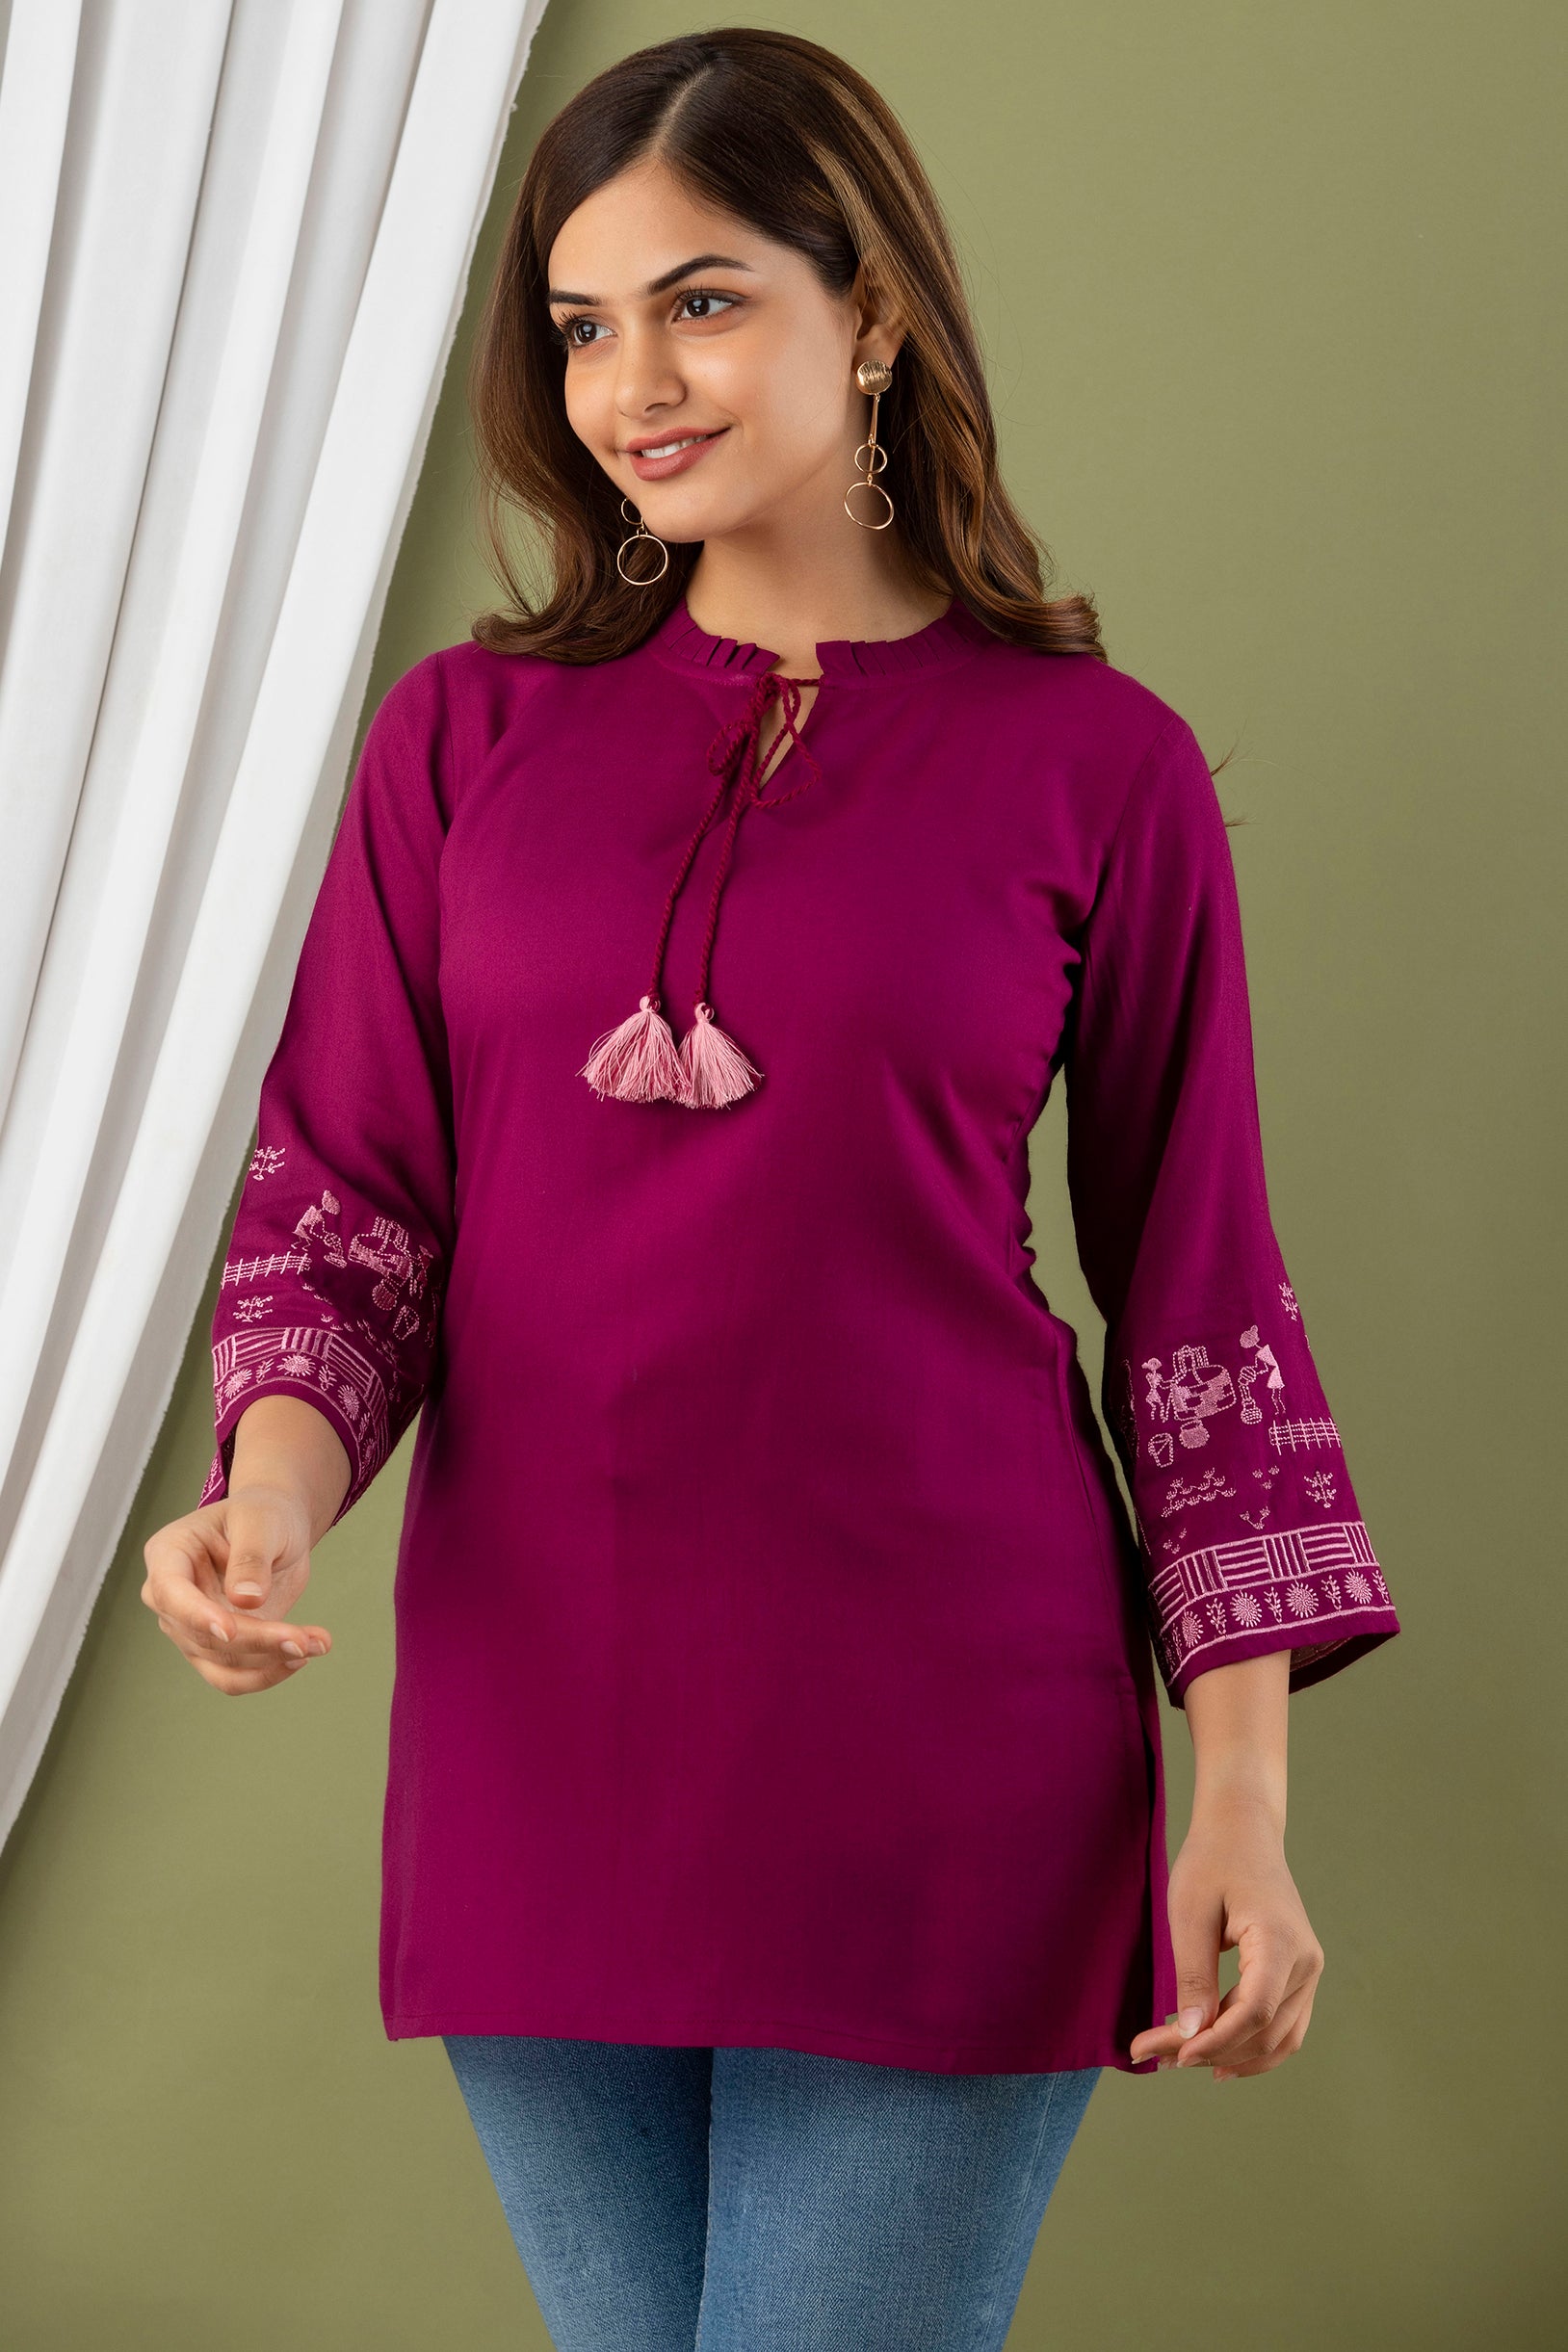 Women's Wine Color Embroidered Top - Misskurti